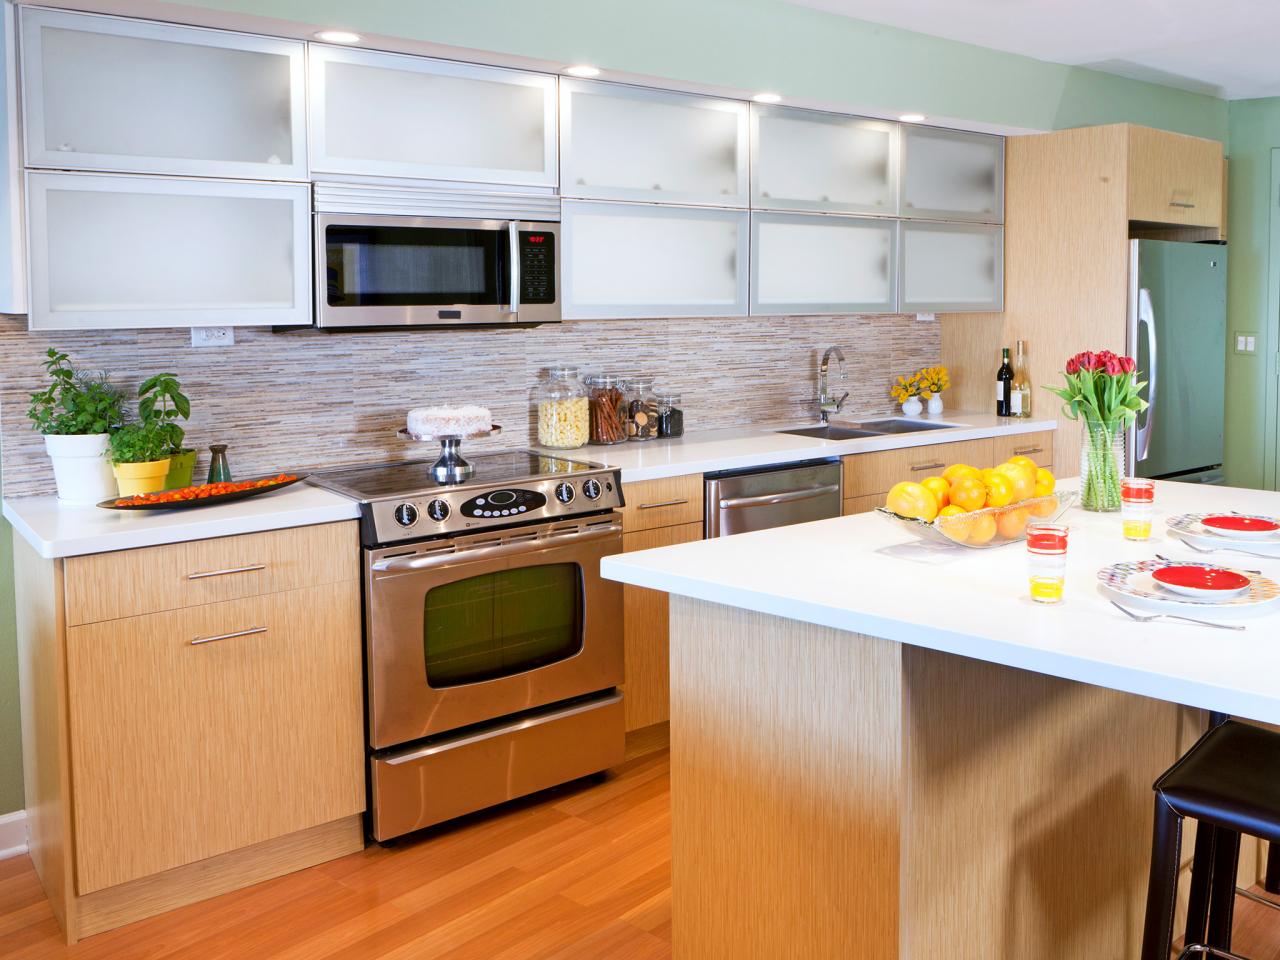 Stock Kitchen Cabinets Pictures Ideas Tips From Hgtv Hgtv